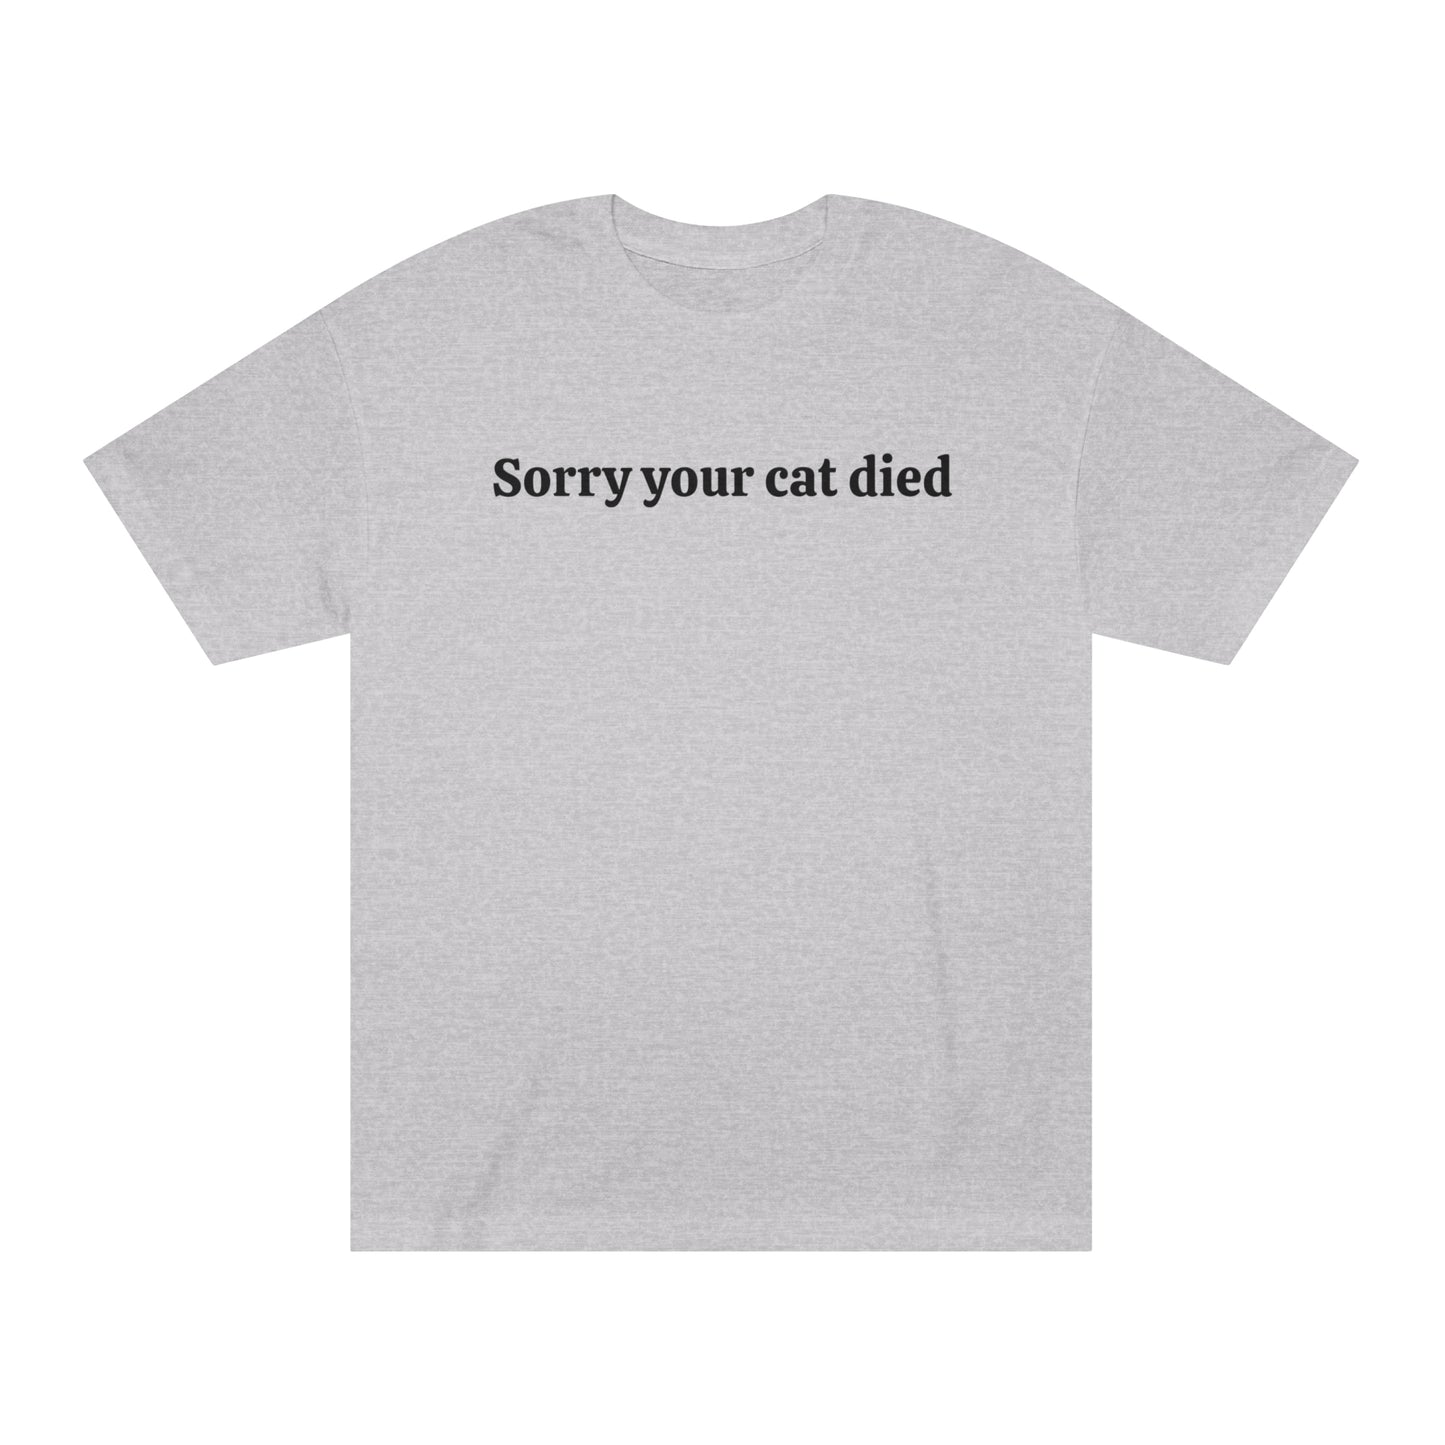 Sorry your cat died